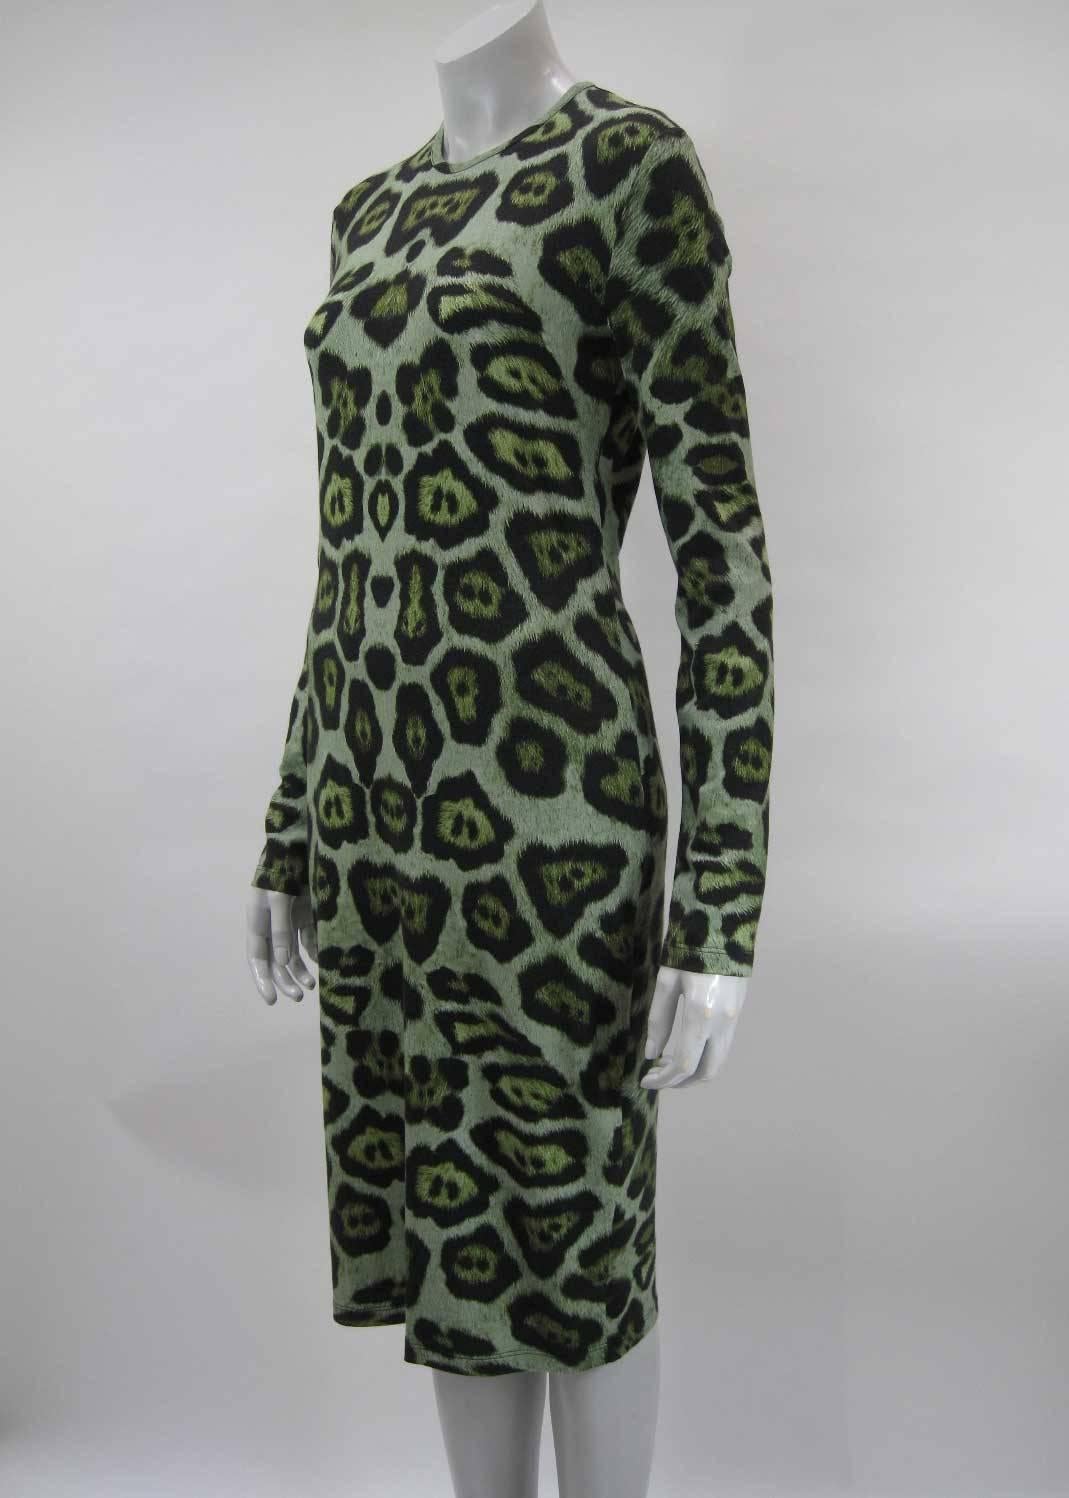 Givenchy Leopard Print Stretch Jersey Dress In Excellent Condition In Oakland, CA